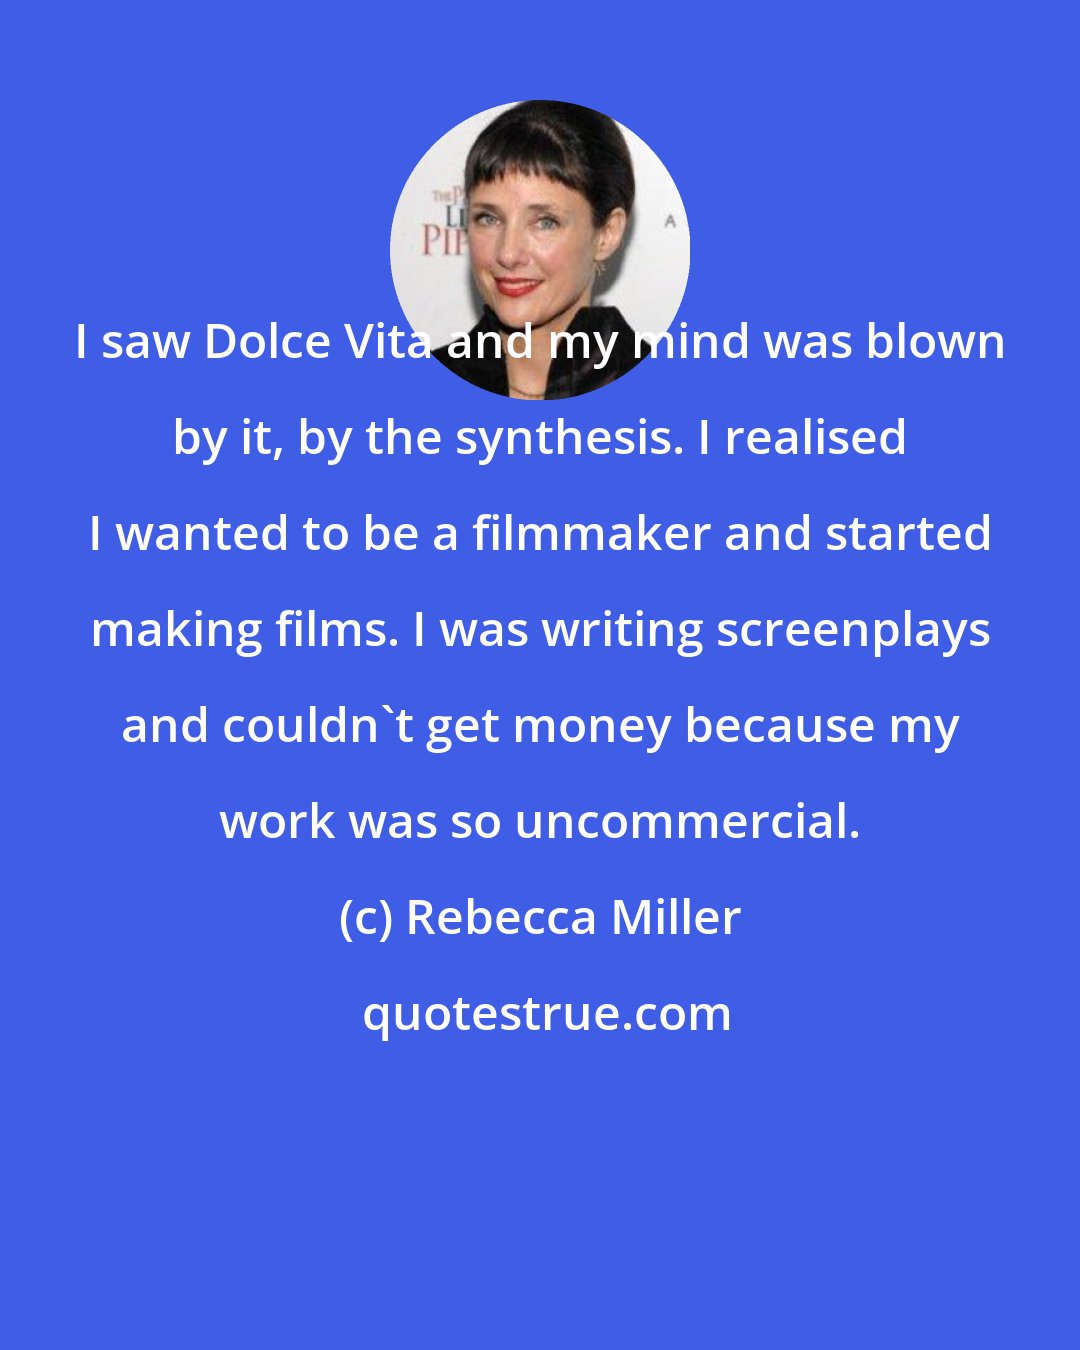 Rebecca Miller: I saw Dolce Vita and my mind was blown by it, by the synthesis. I realised I wanted to be a filmmaker and started making films. I was writing screenplays and couldn't get money because my work was so uncommercial.